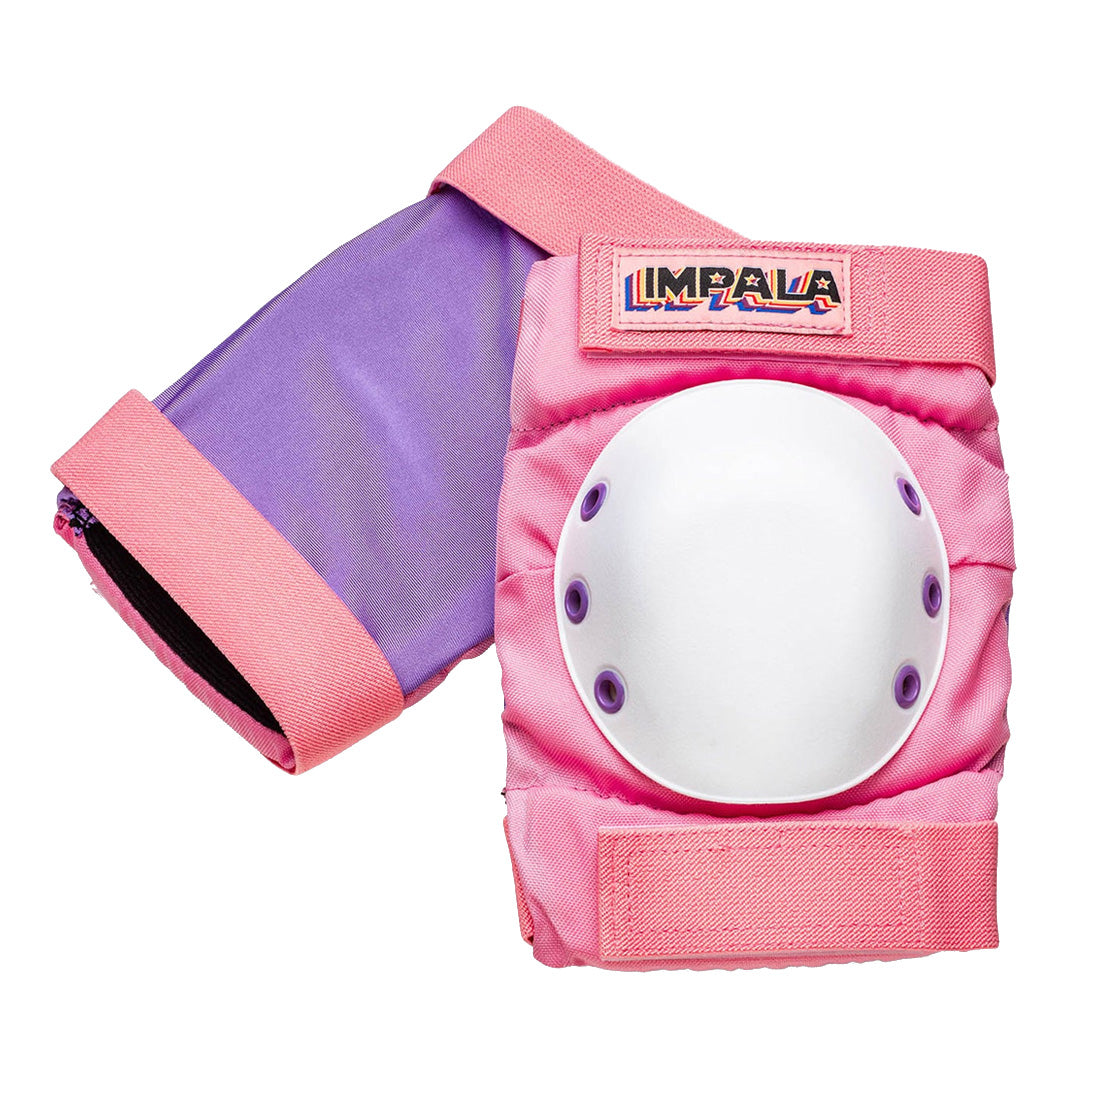 Impala Tri Pack Pink - Adult Protective Gear